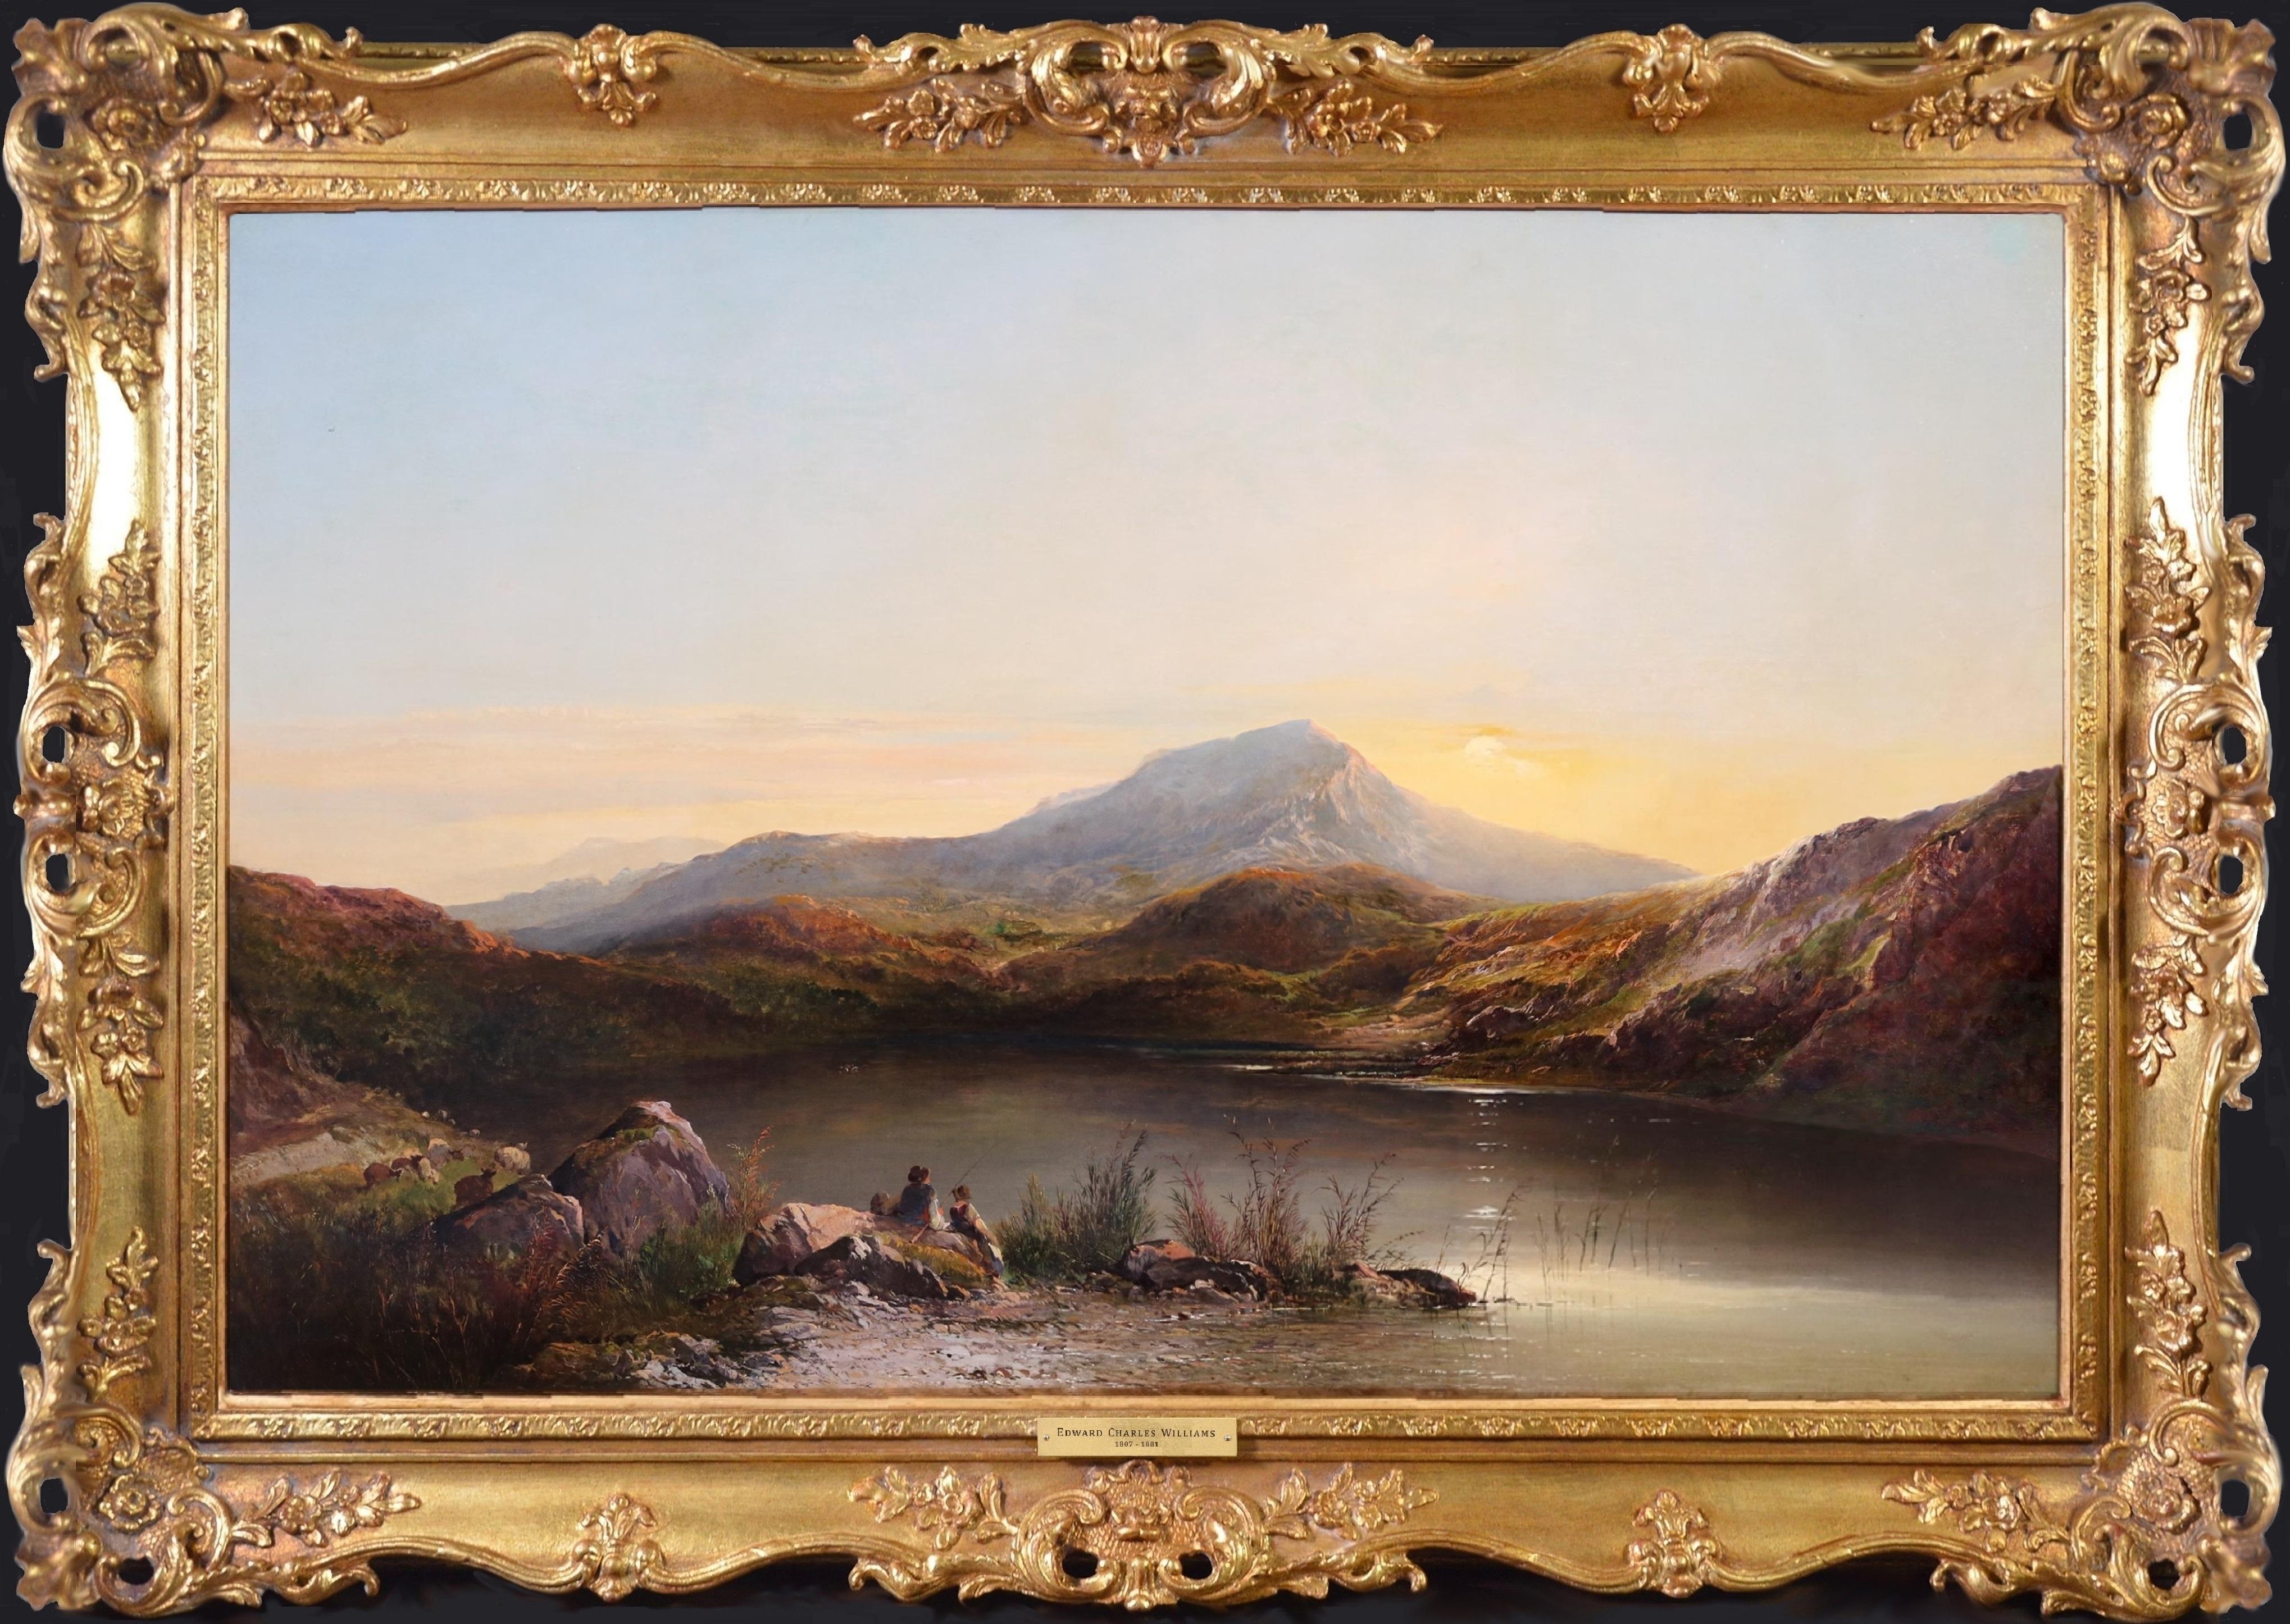 ‘Llyn Gwynant and Mount Snowdon’ by Edward Charles Williams (1807-1881). 

The painting – which depicts figures seated on the lake shore before the iconic Mount Snowdon (Yr Wyddfa) in North Wales – is signed by the artist and dated 1863. The